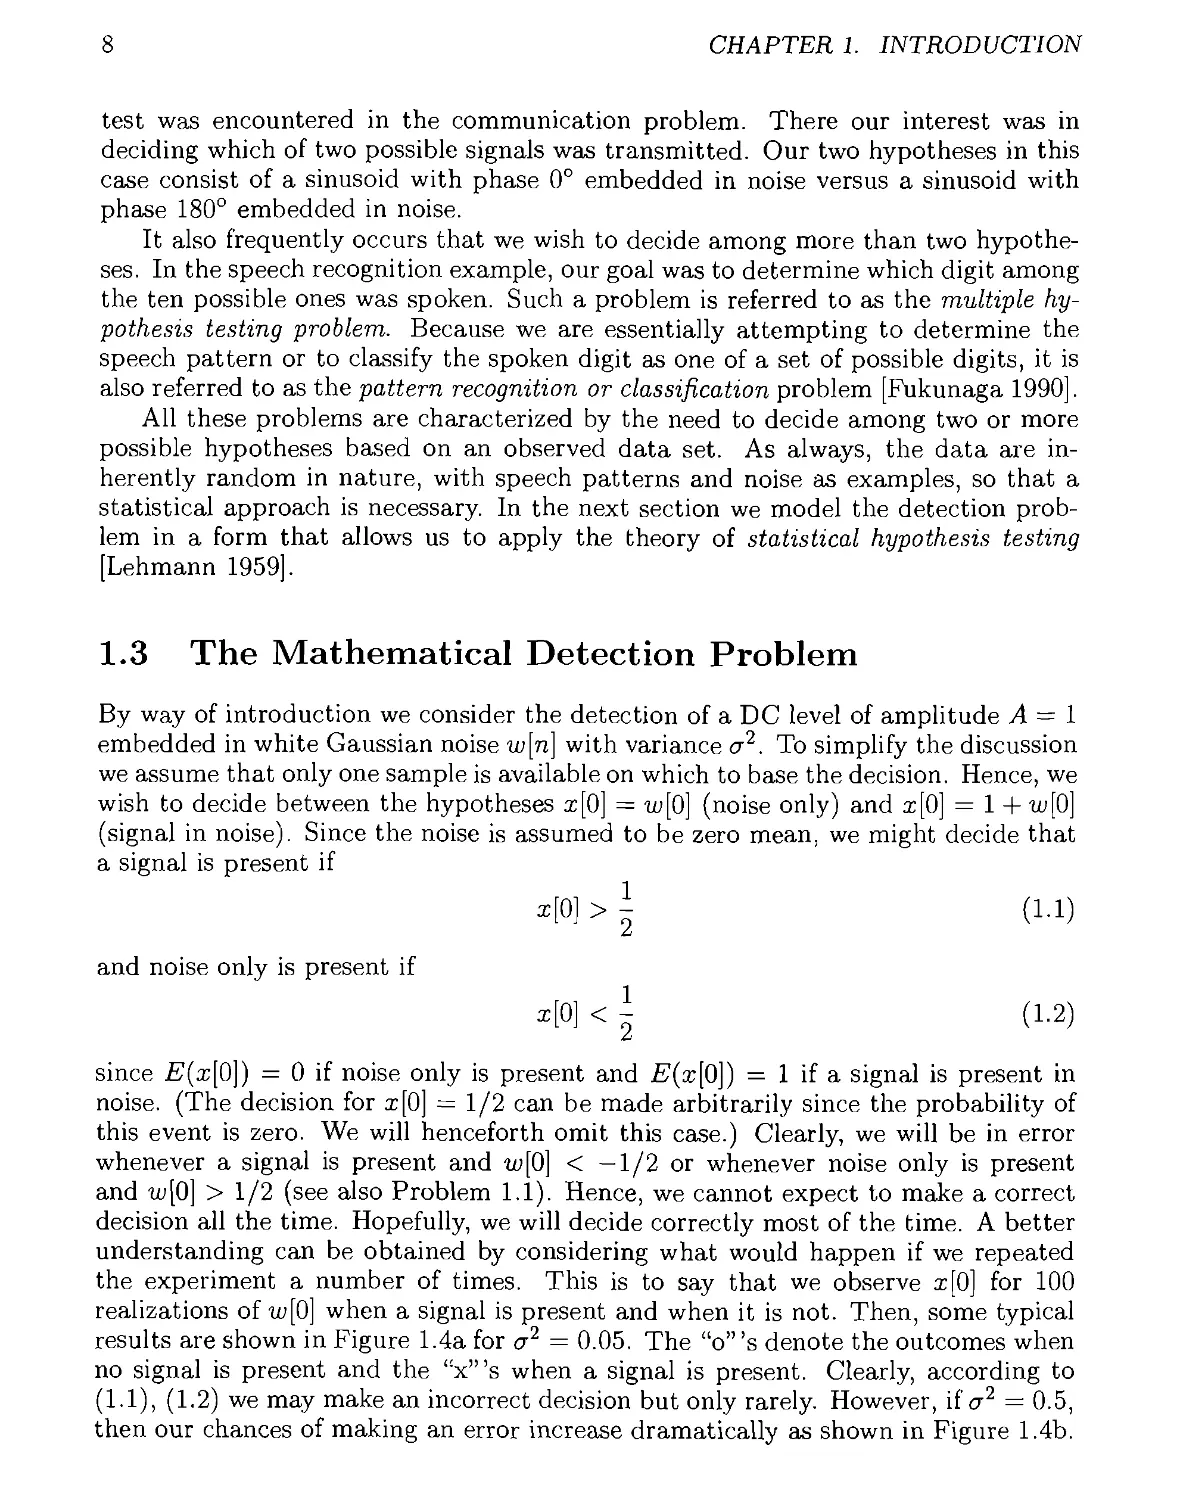 1.3 The Mathematical Detection Problem